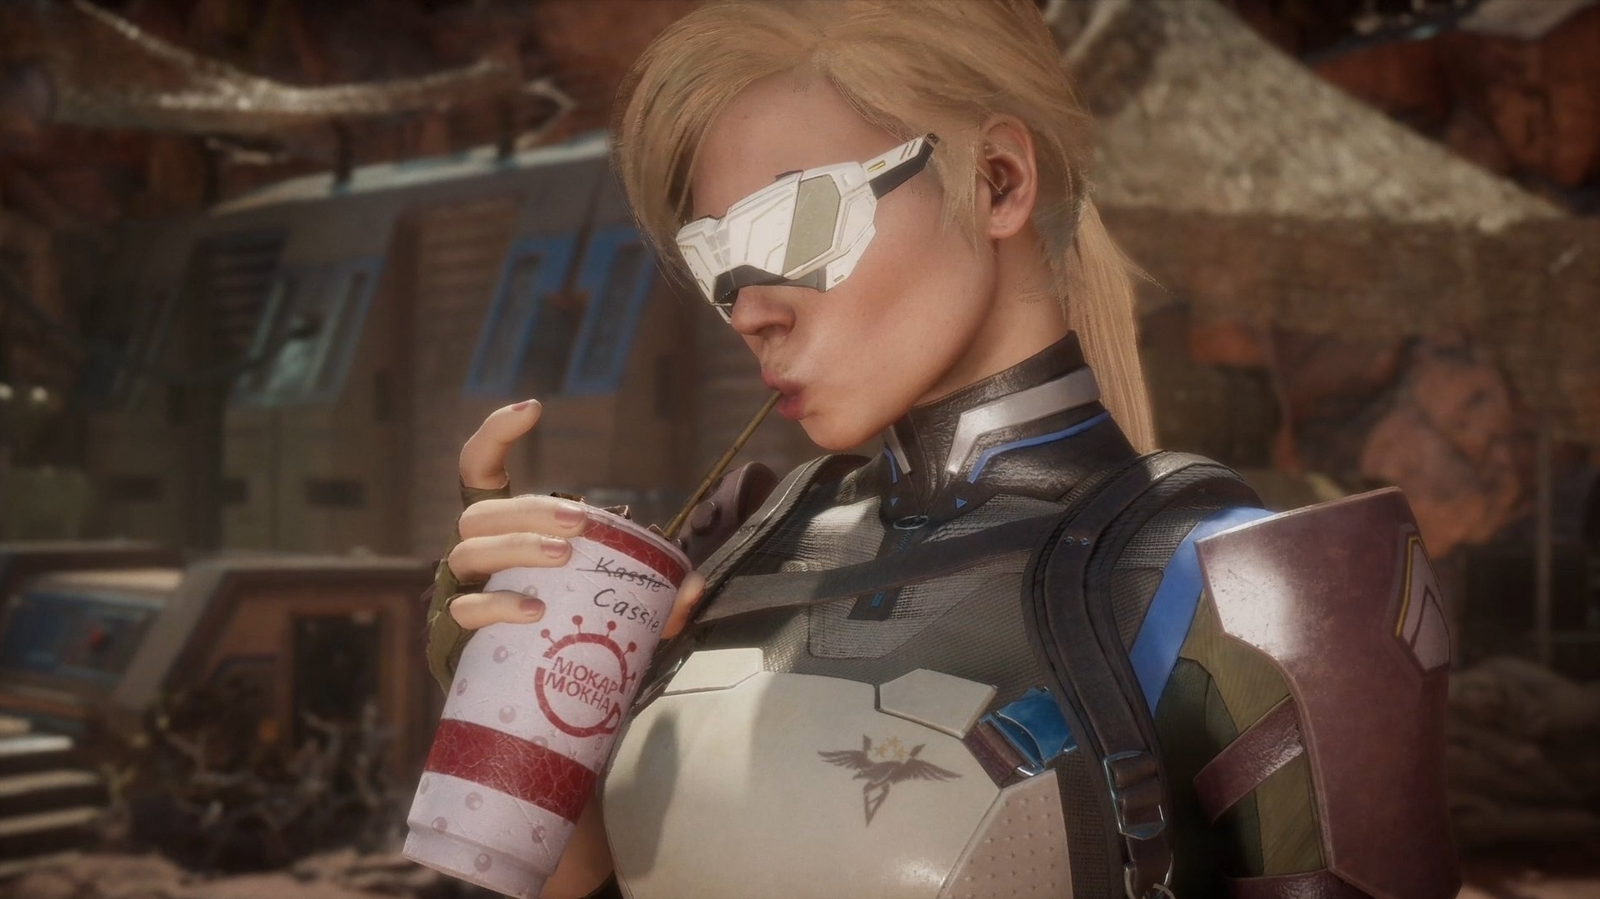 Mortal Kombat 11s Cassie Cage will dab over your corpse